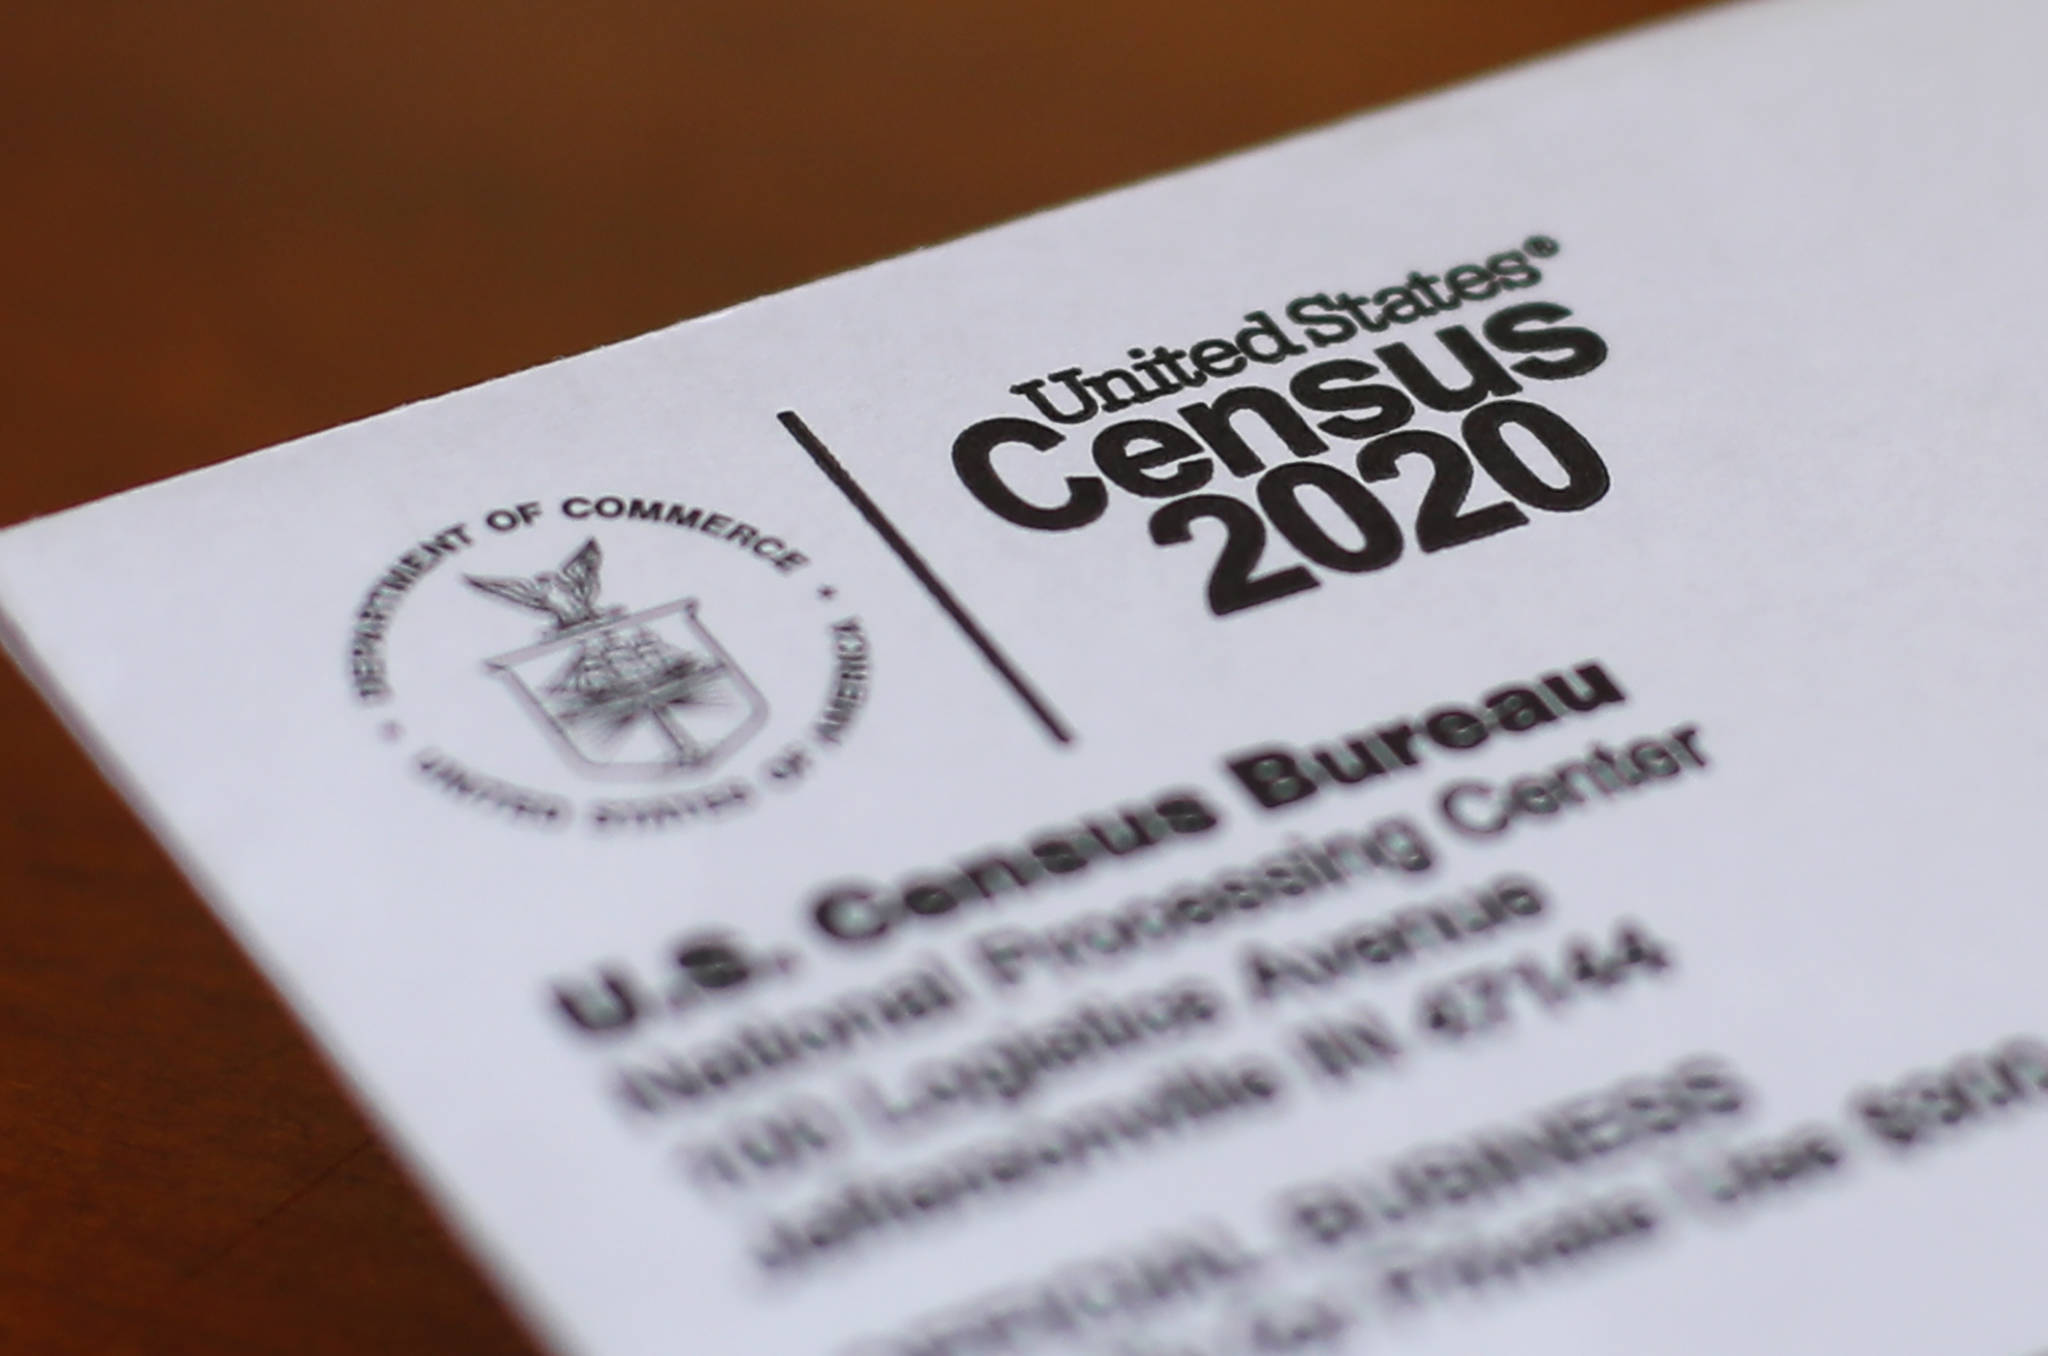 US official: 2020 census to end Oct. 5 despite court order